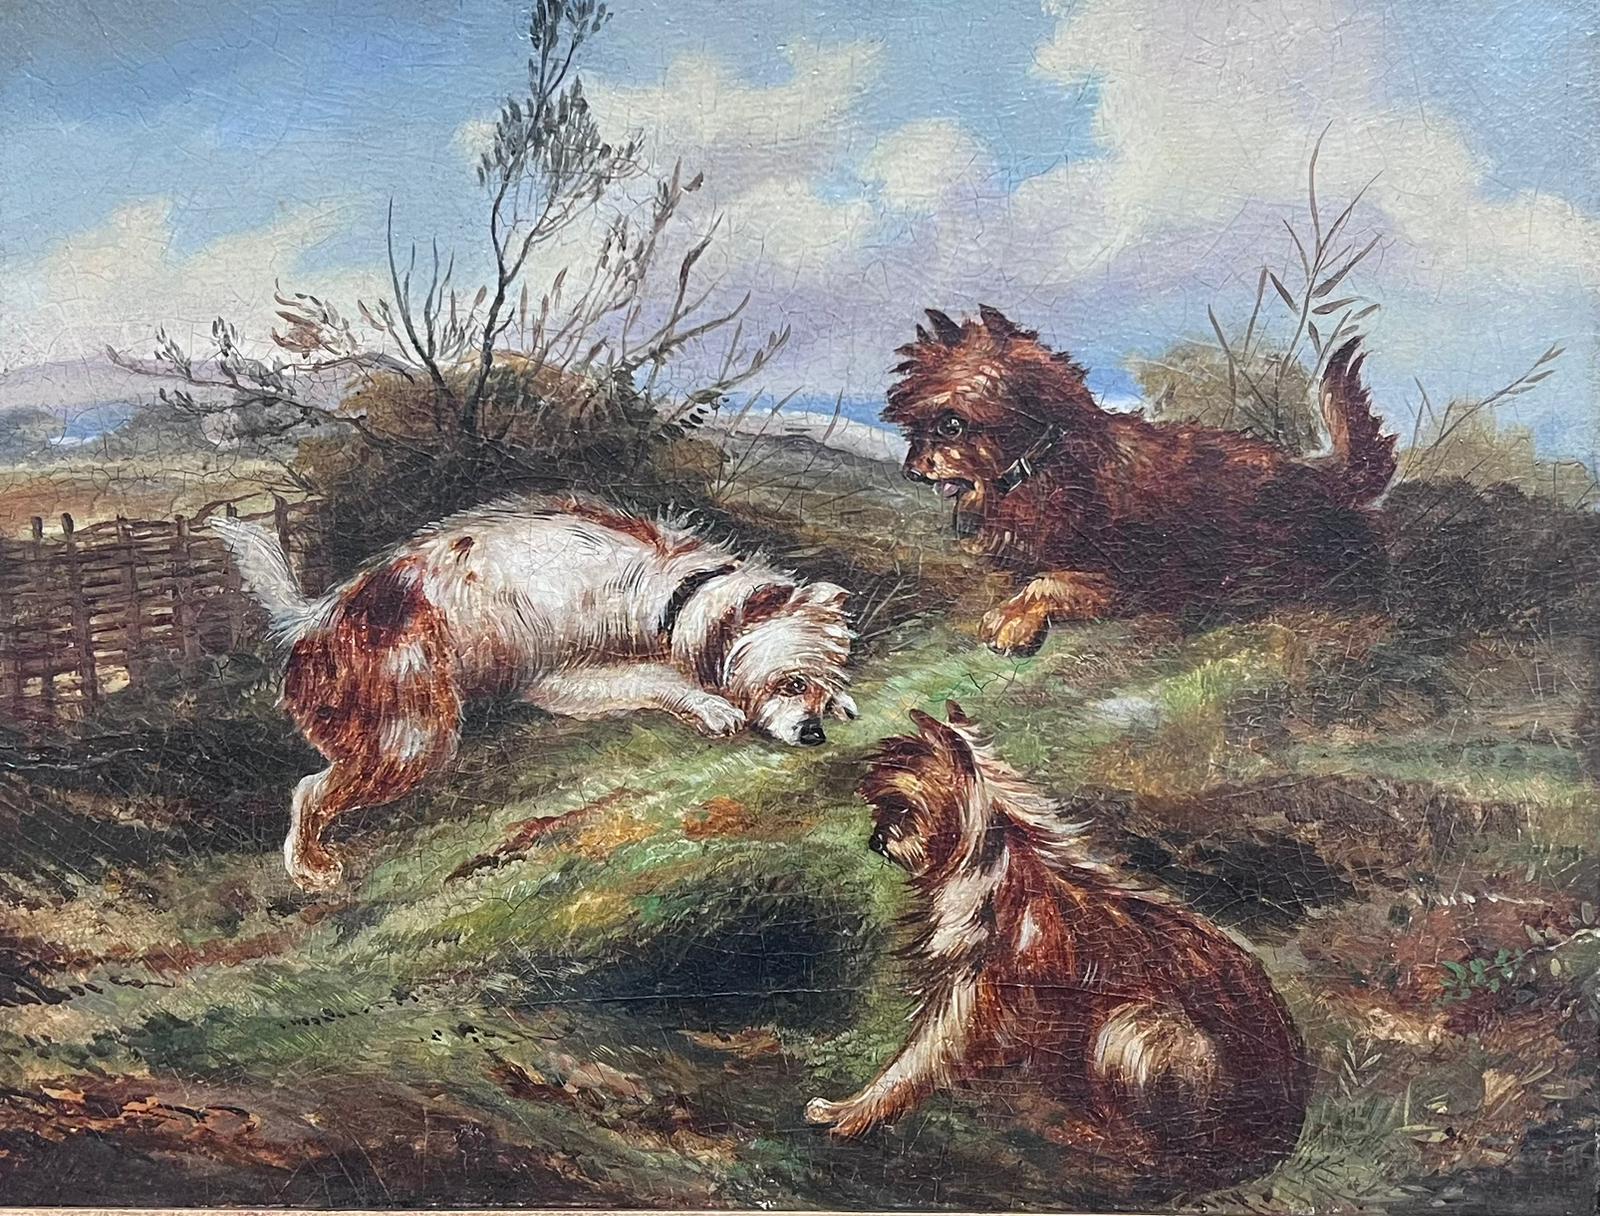 Three Terrier Dogs in Landscape
English artist, mid 19th century
circle of George Armfield (English dog painter, 1808-1893)
oil on board, framed
framed: 19.5 x 23 inches
board: 13 x 17 inches
provenance: private collection, UK
condition: very good